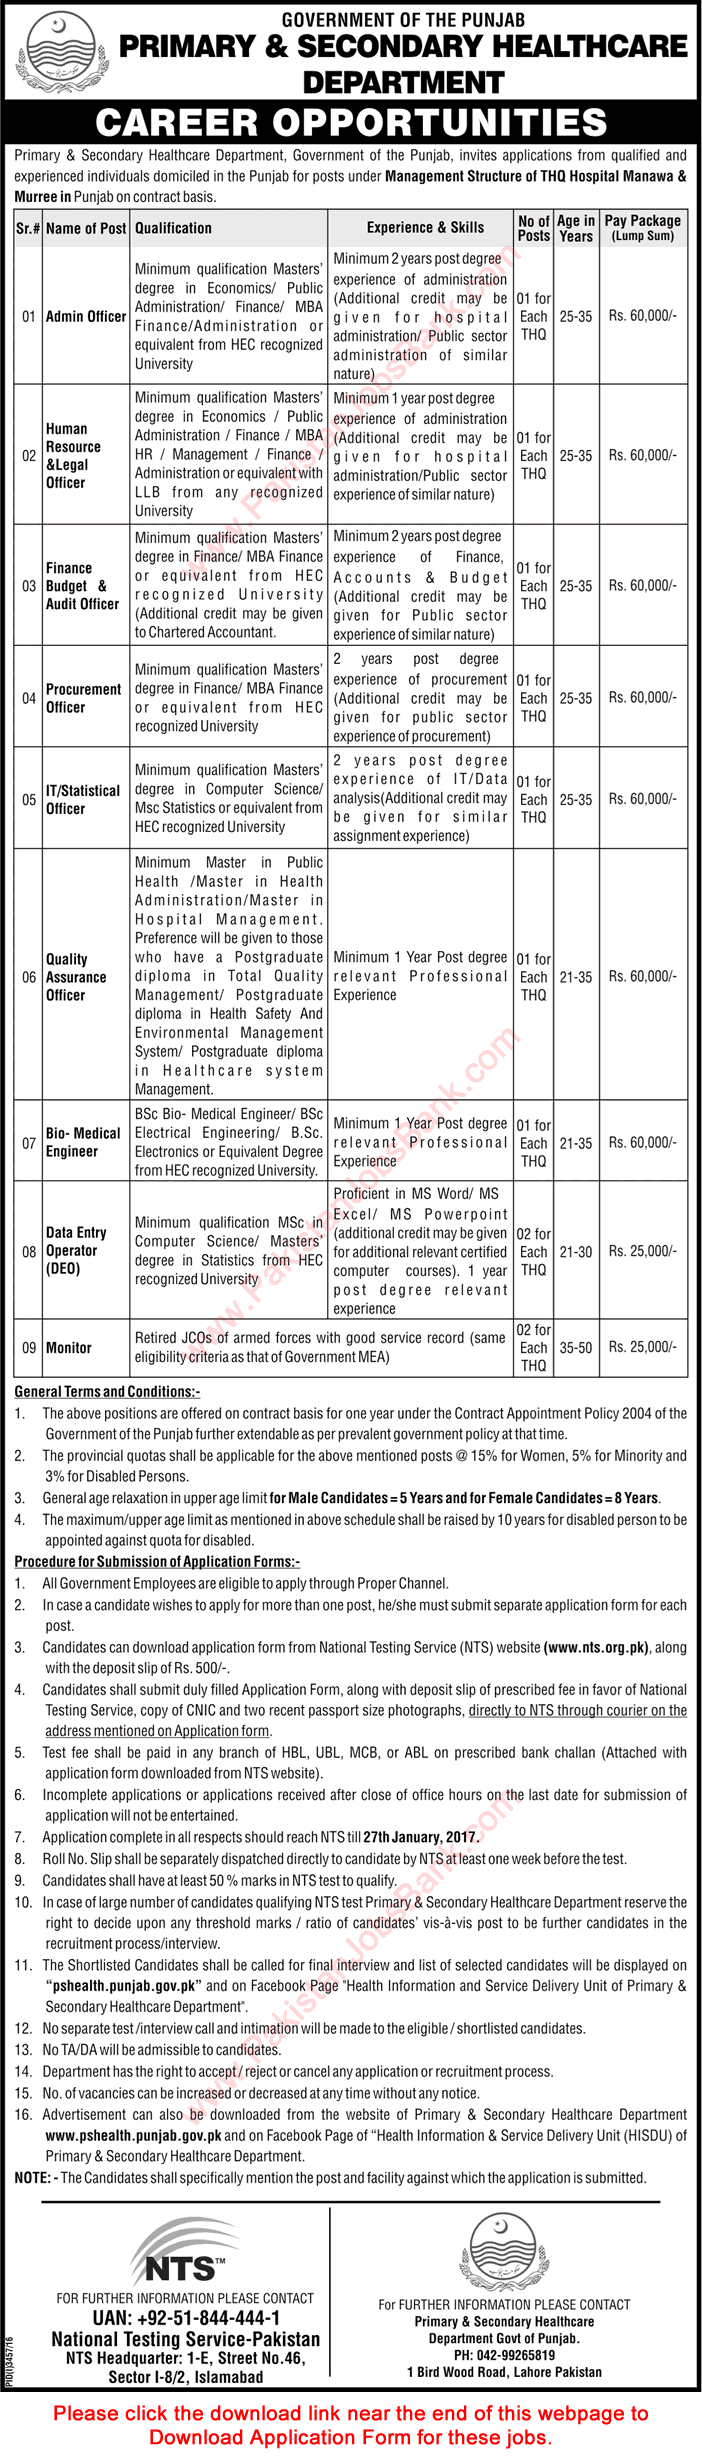 Primary and Secondary Healthcare Department Punjab Jobs 2017 NTS Application Form Download Latest